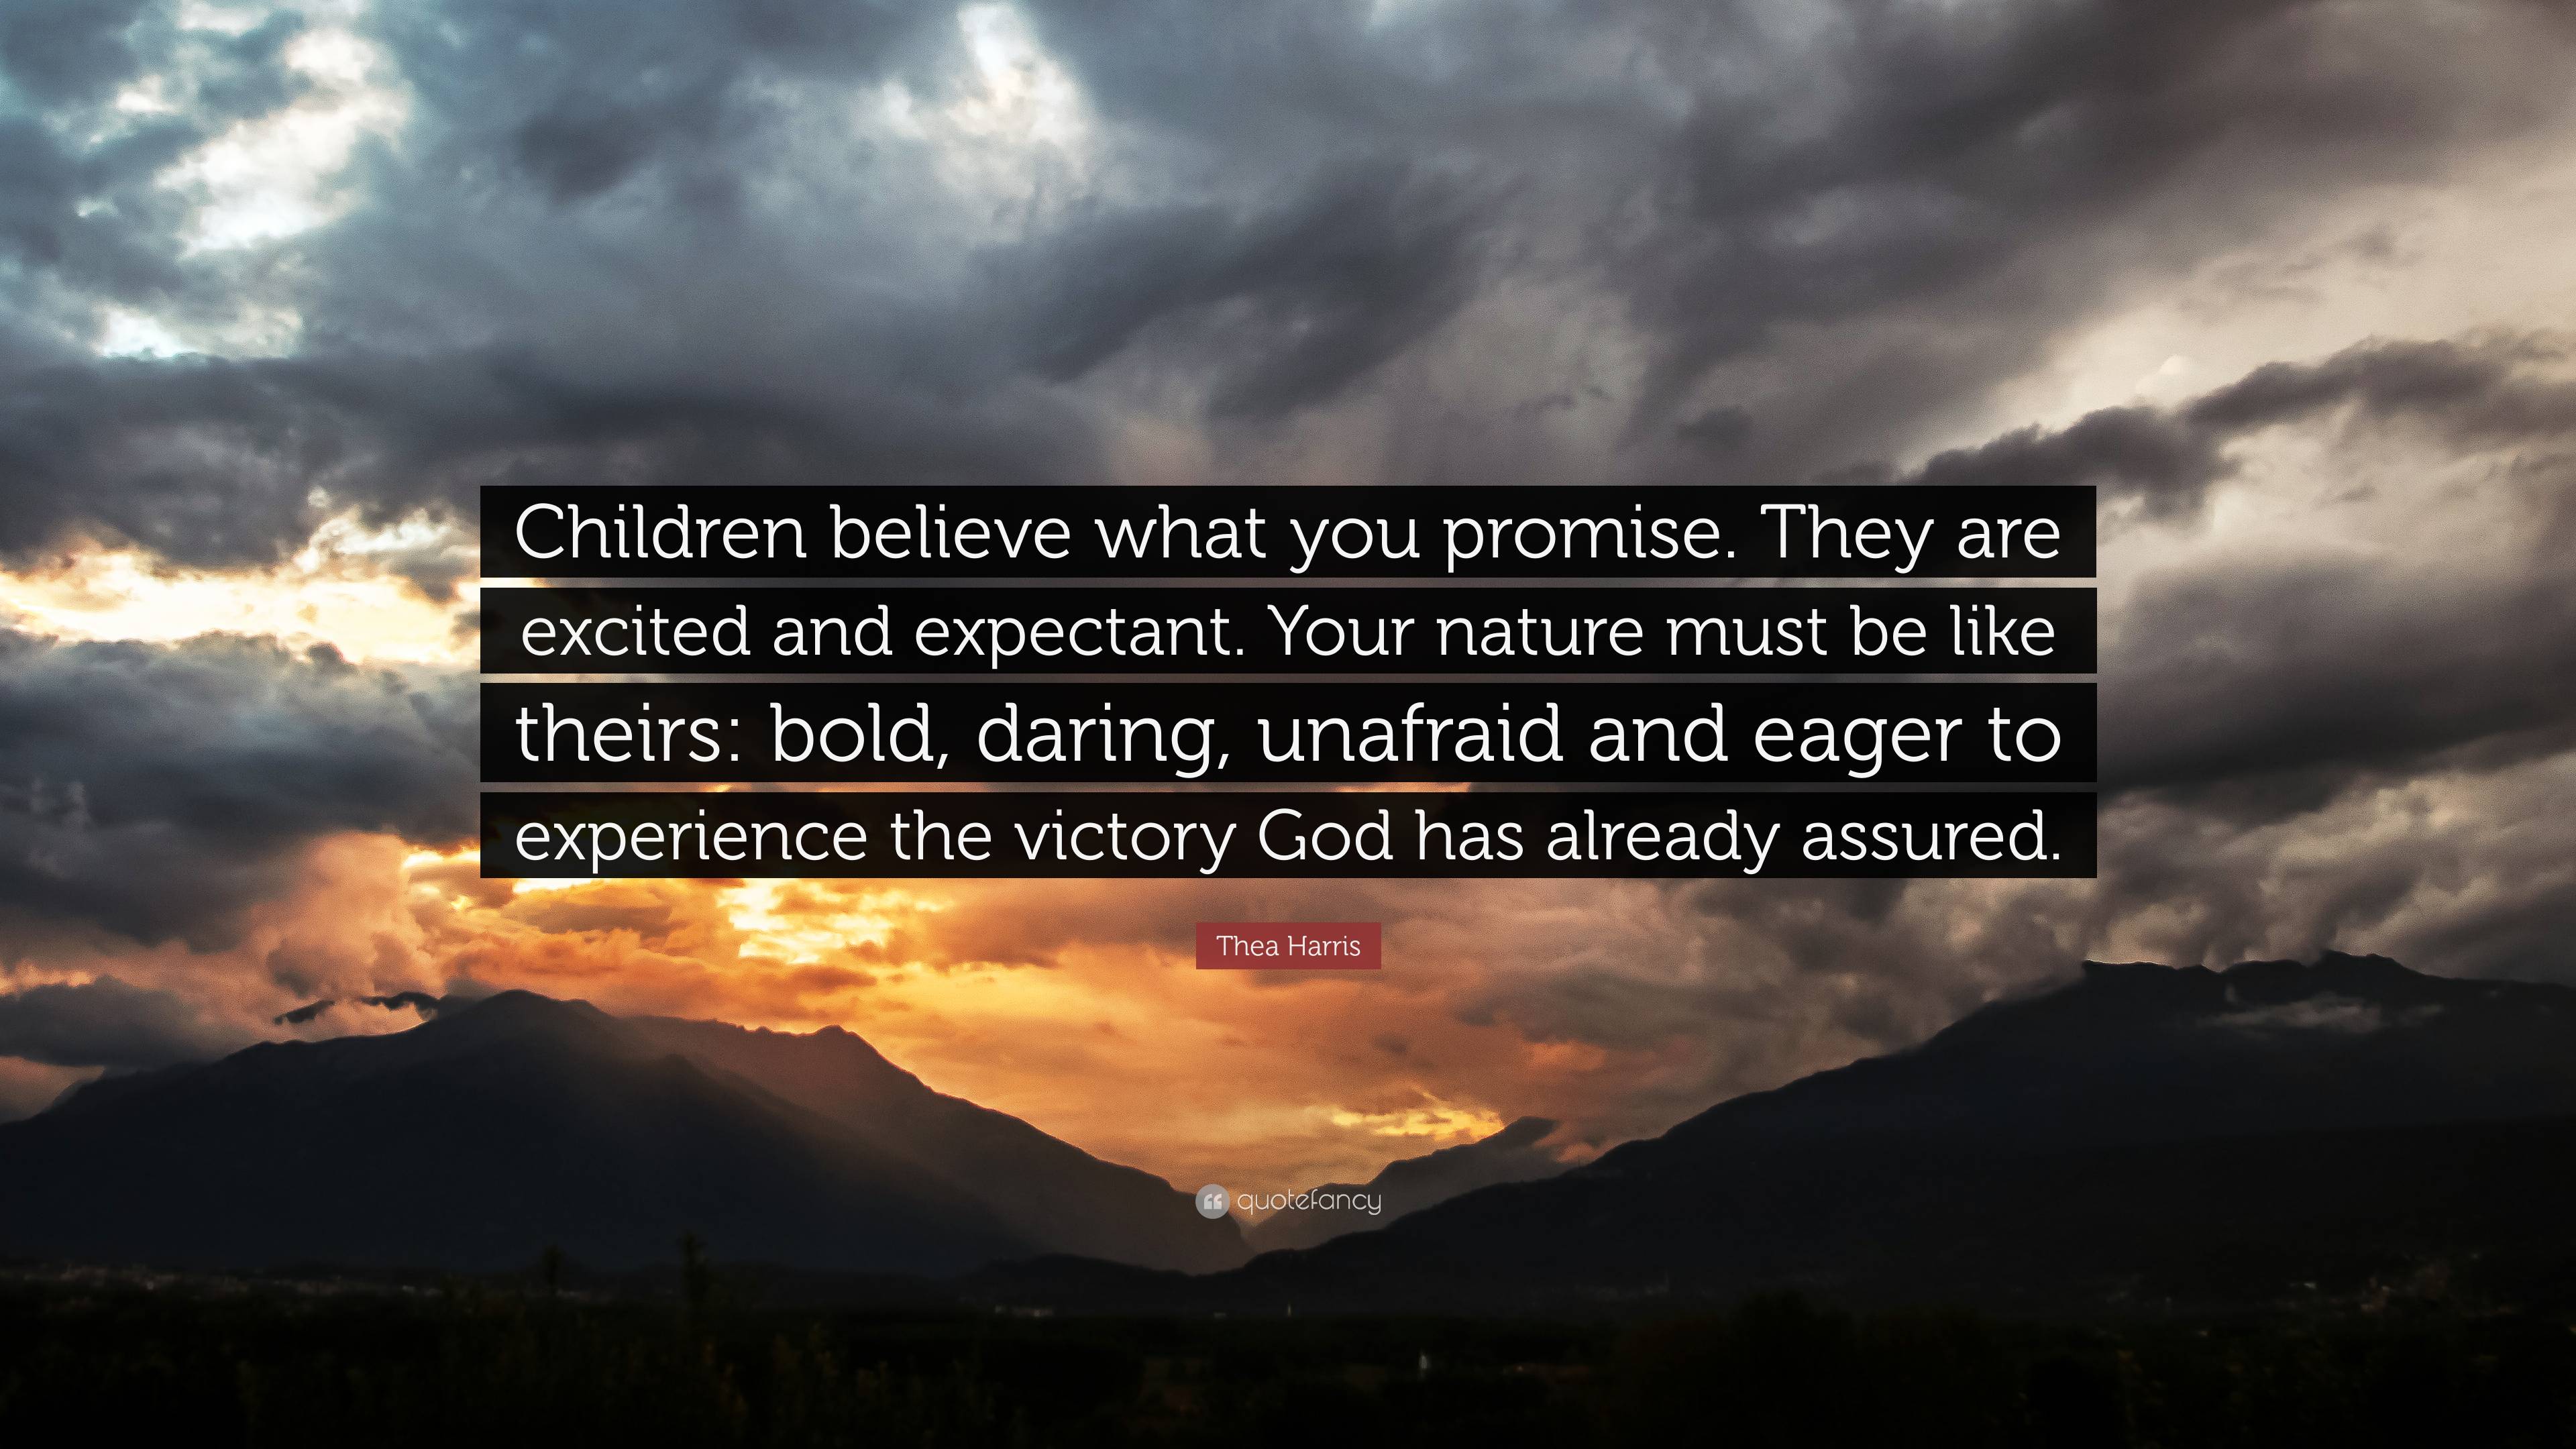 Thea Harris Quote: “Children believe what you promise. They are excited ...